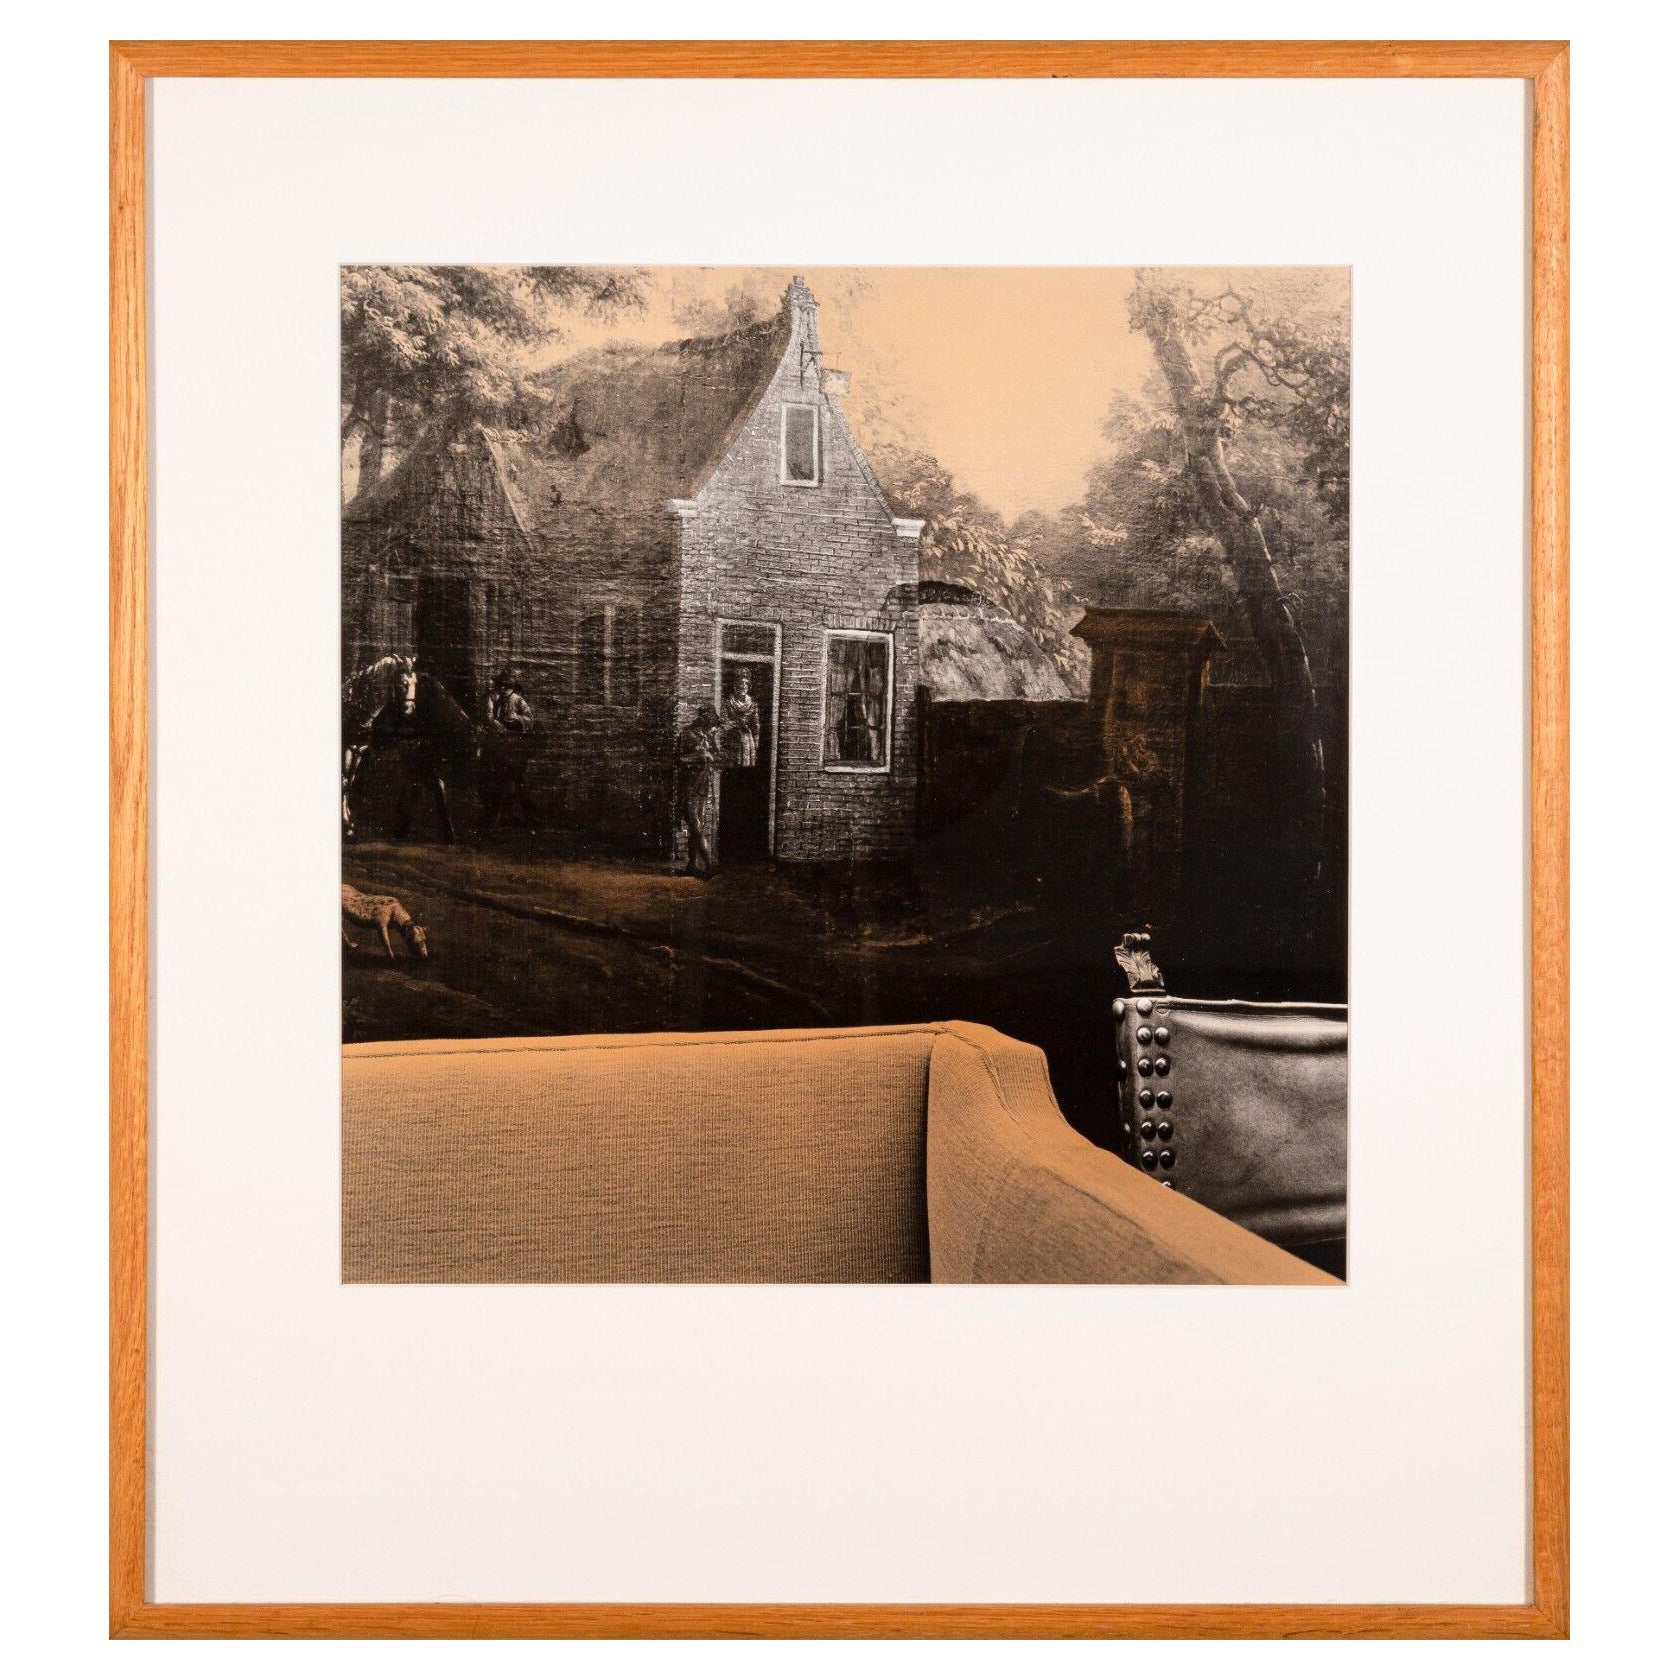 Denny Moers Contemporary Surrealist Hand Printed Photographic Monoprint Framed For Sale